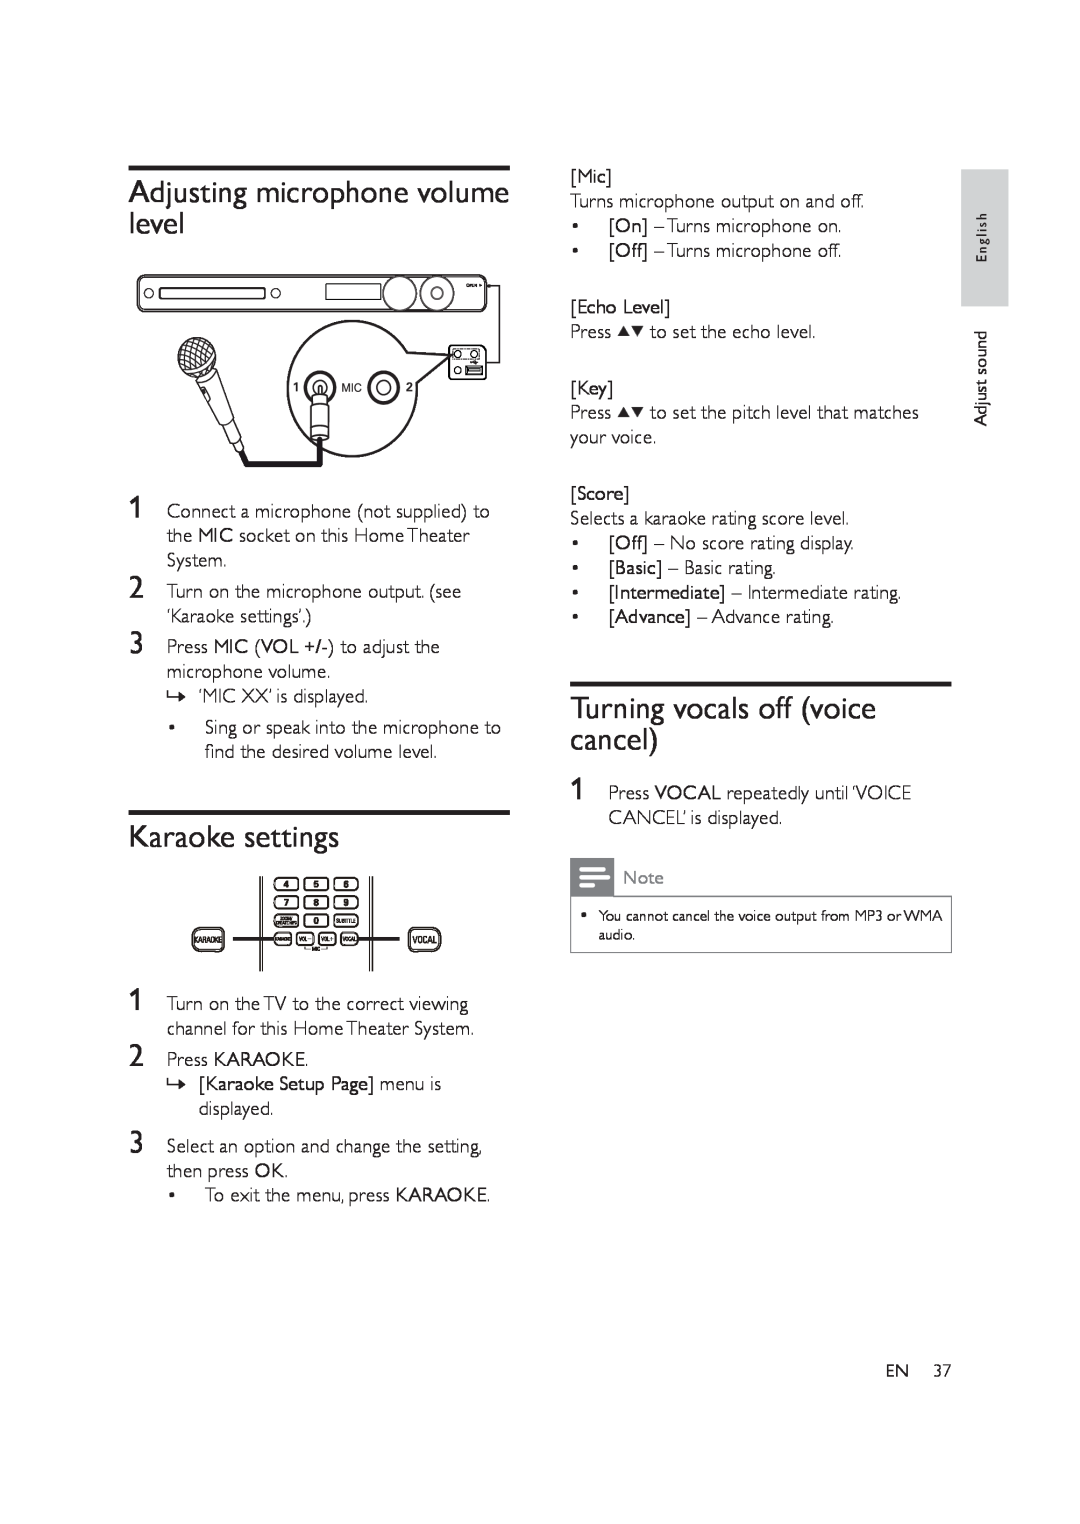 Philips HTS3578W user manual Adjusting microphone volume level, Karaoke settings, Turning vocals off voice cancel 